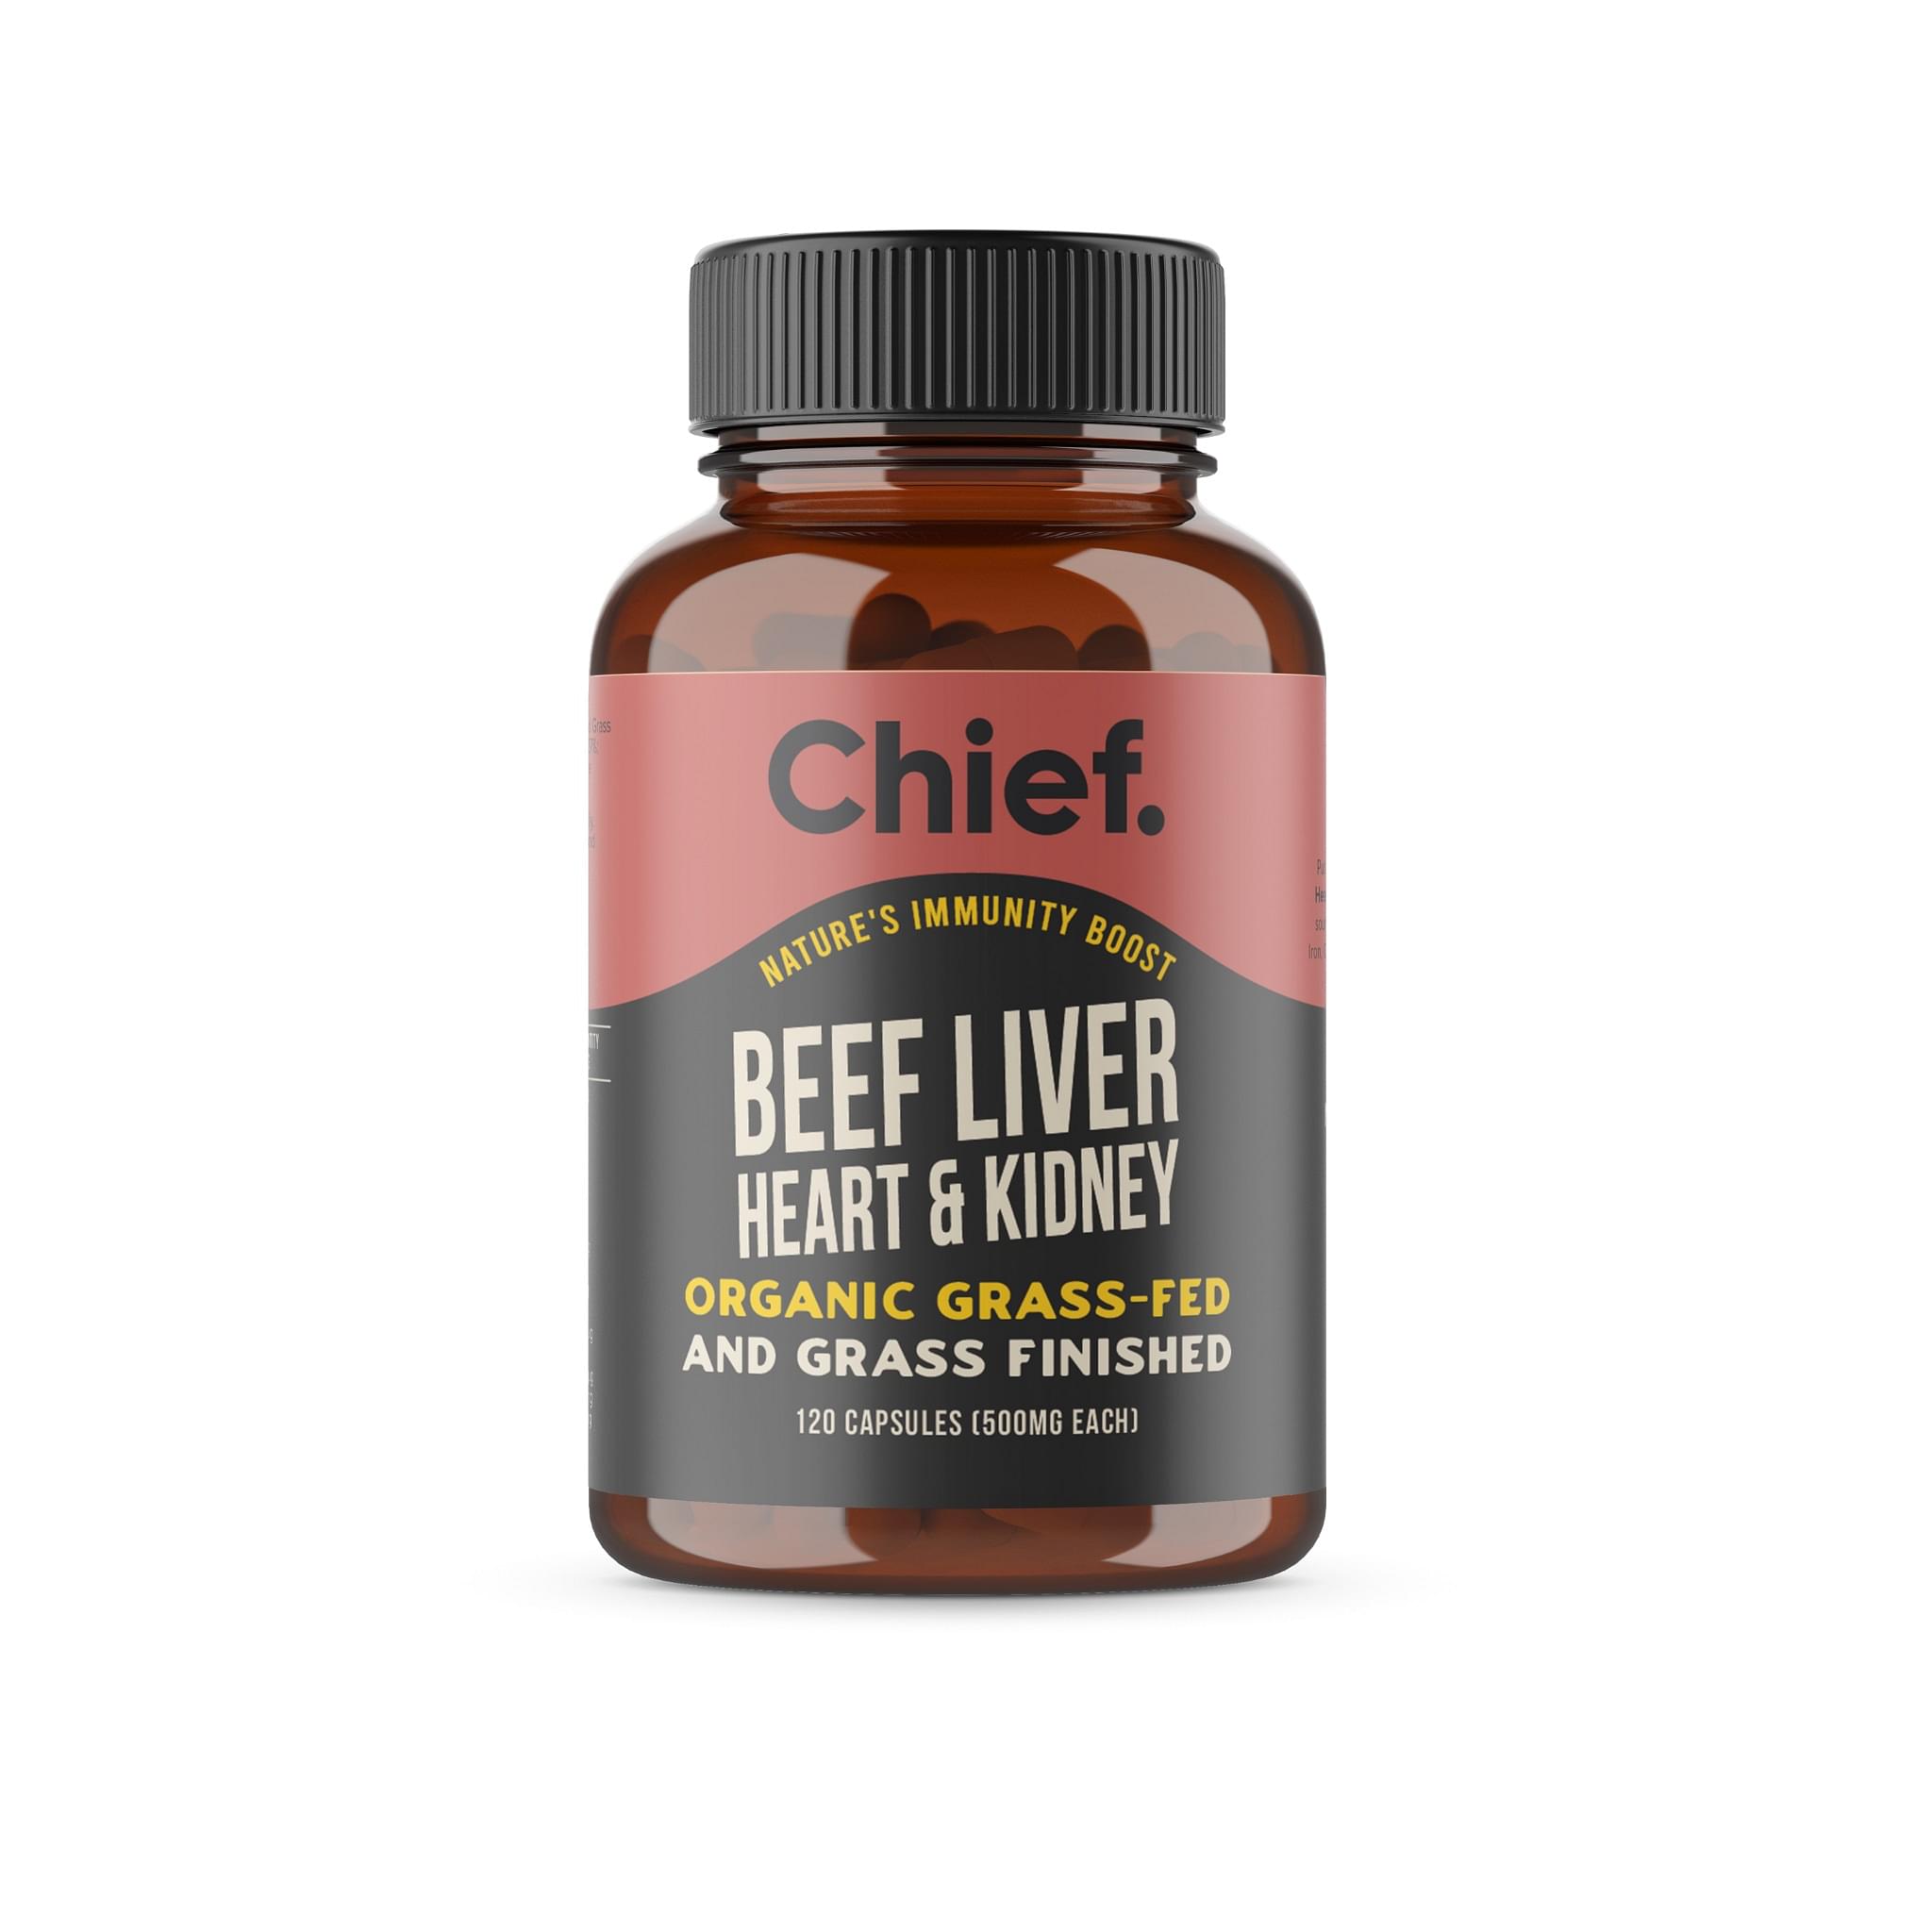 Organic Beef Liver, Heart & Kidney Capsules